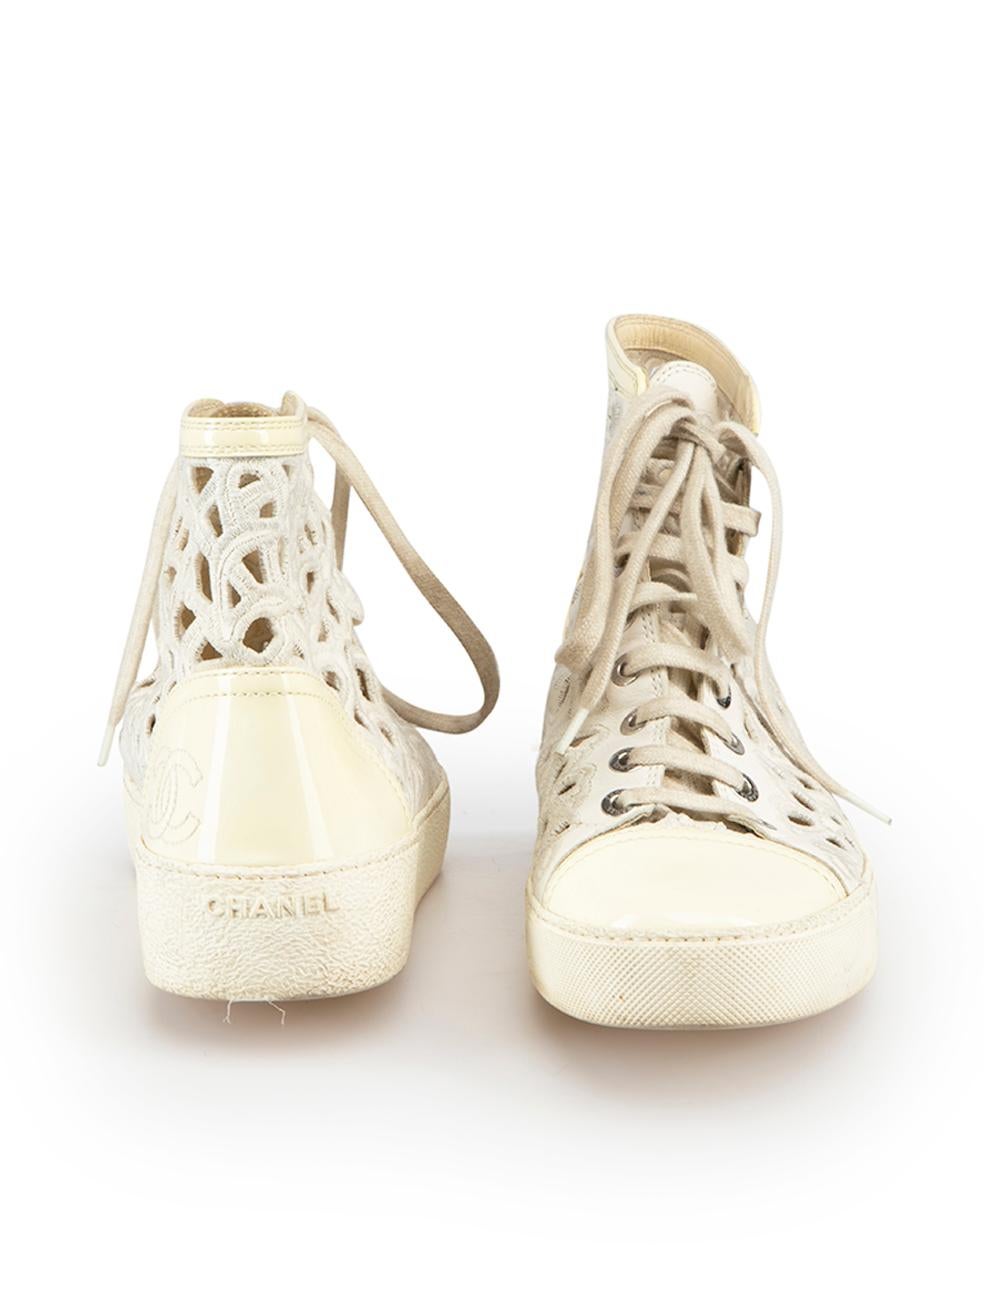 Chanel White Leather Floral High Top Trainers Size IT 36 In Good Condition For Sale In London, GB